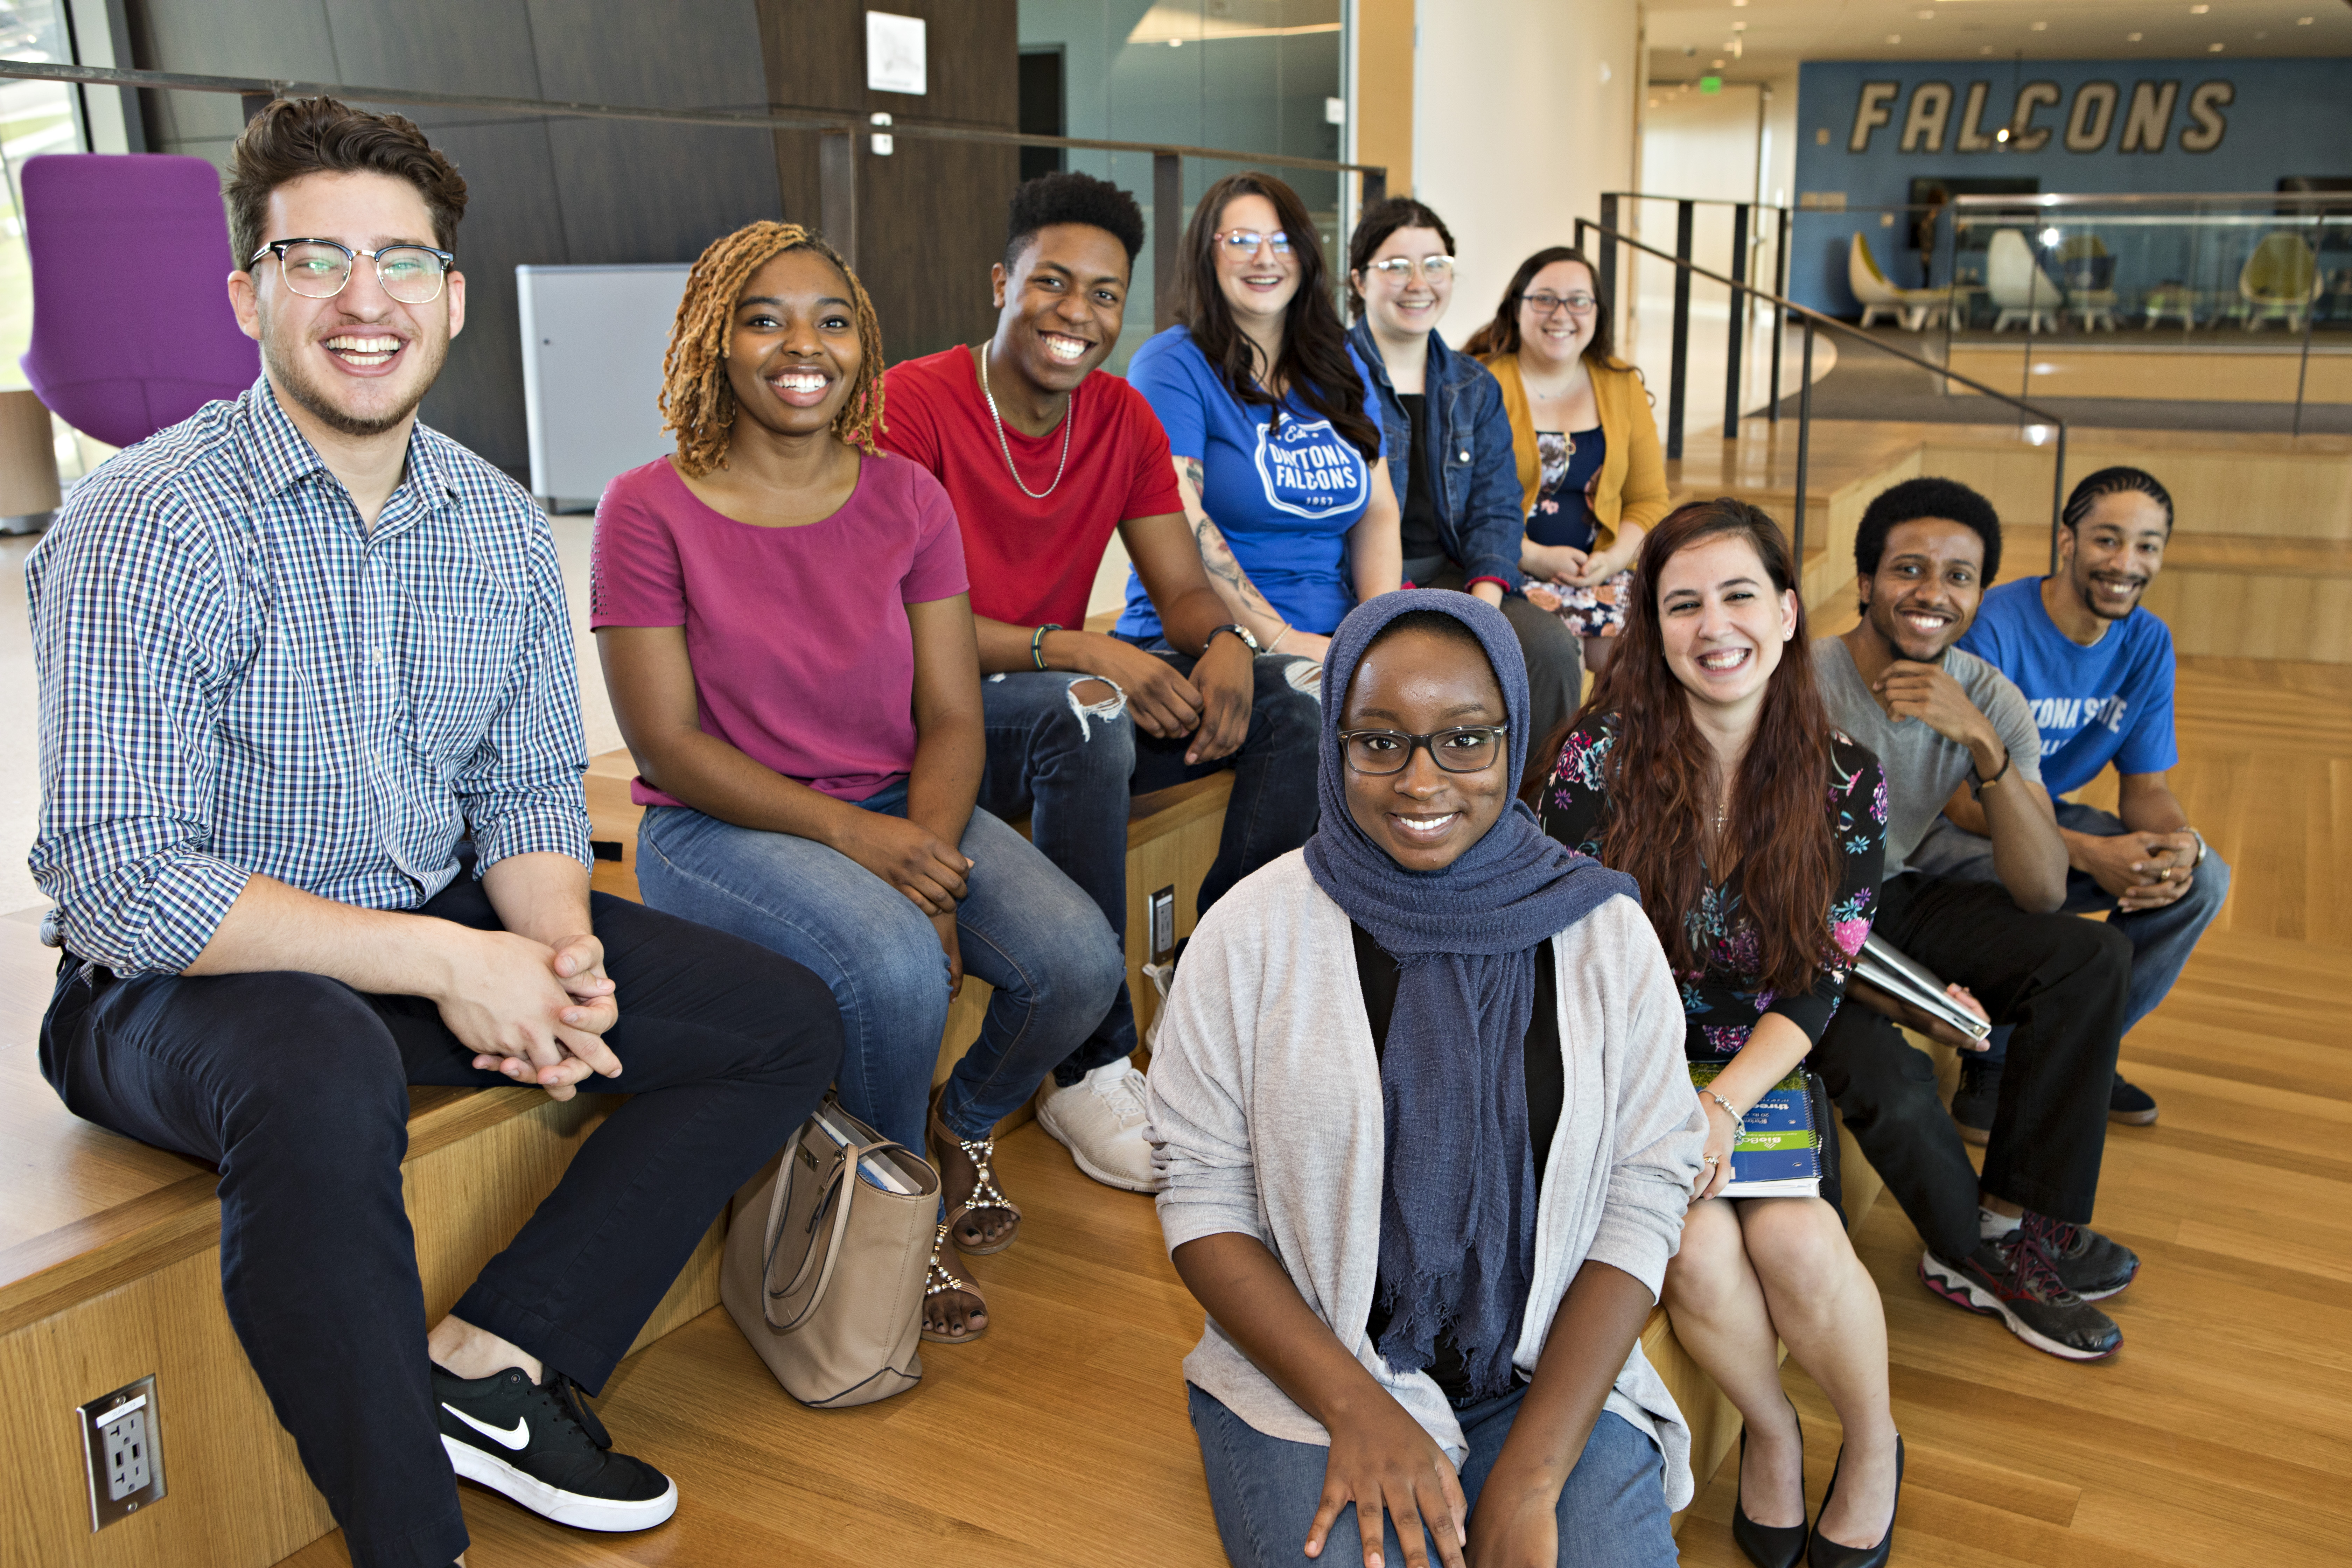 group of diverse student sitting together smiling